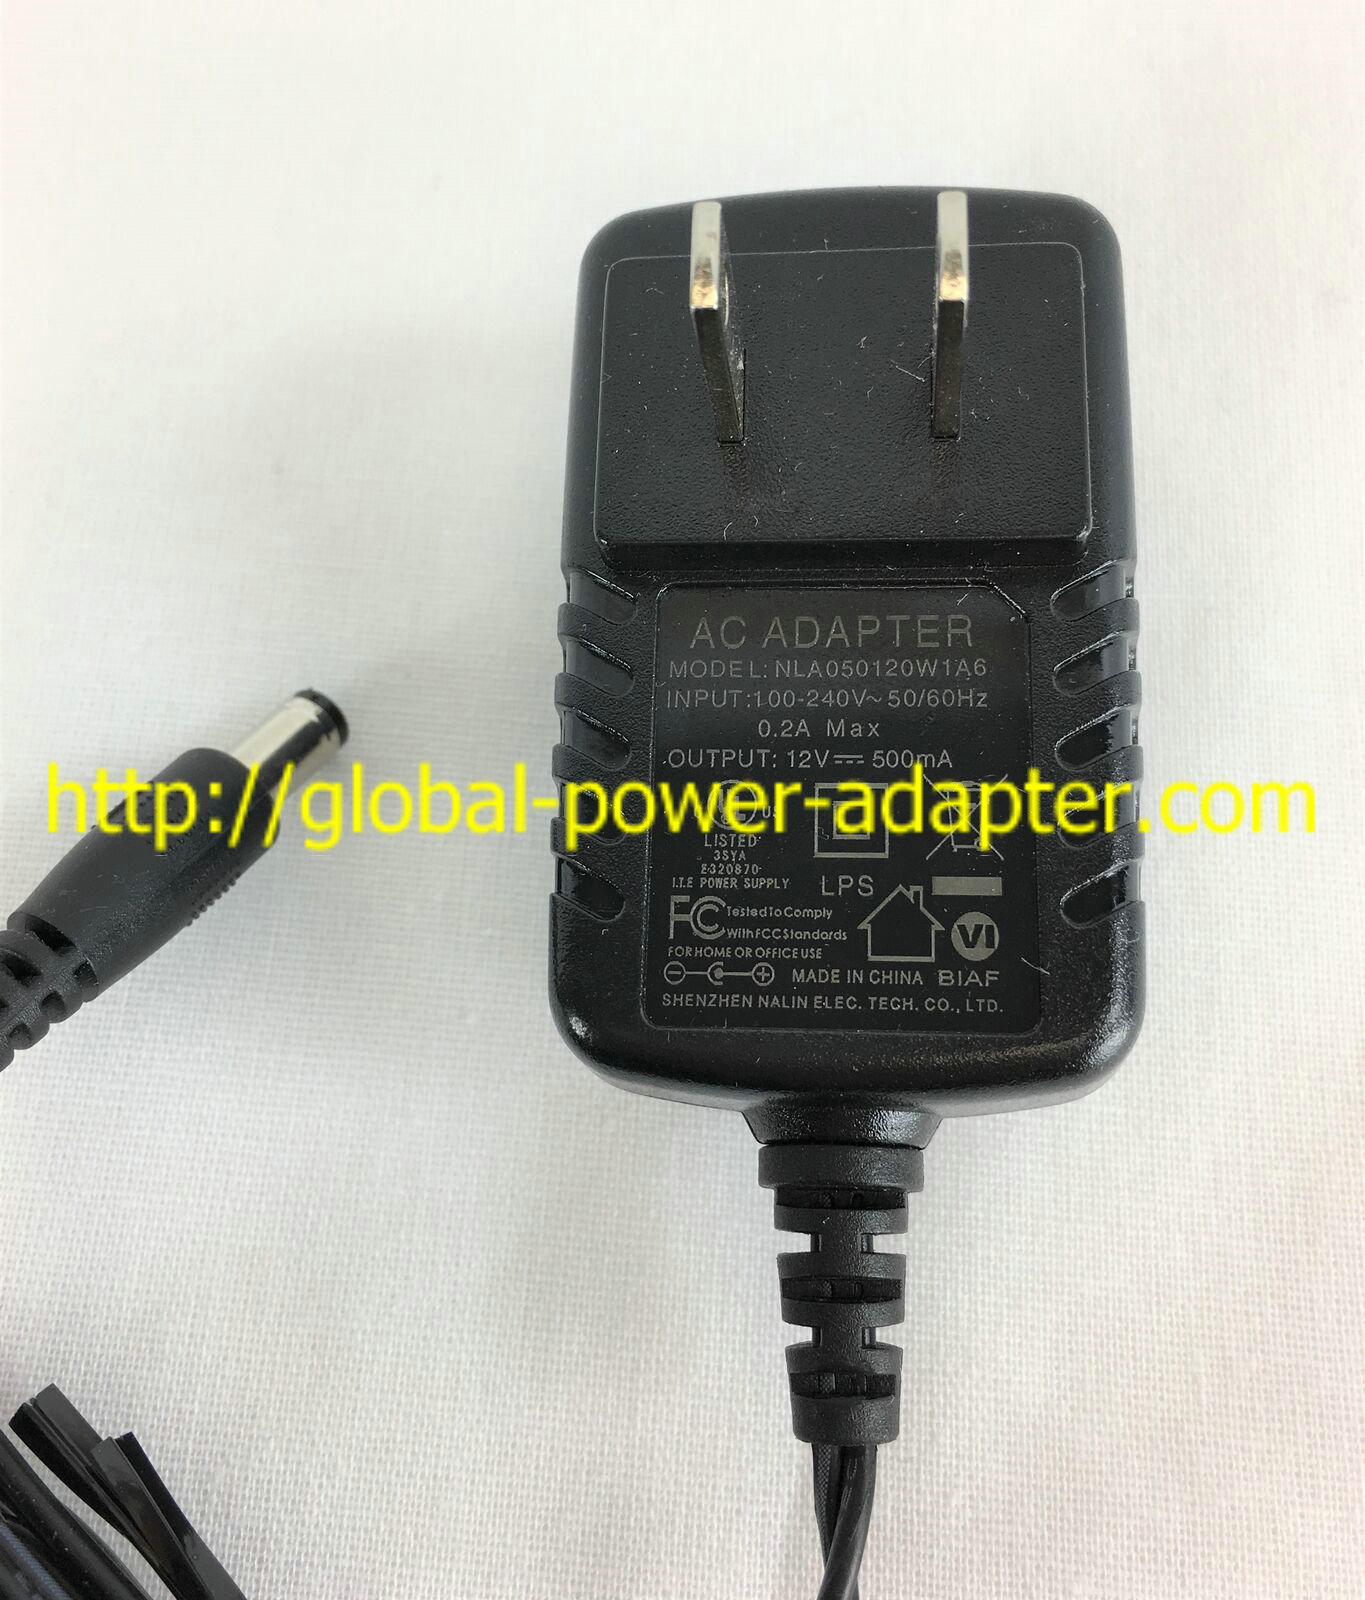 *100% Brand NEW* NLA050120W1A6 12V 0.5A 500mA AC Adapter Power Supply Charger Free shipping!